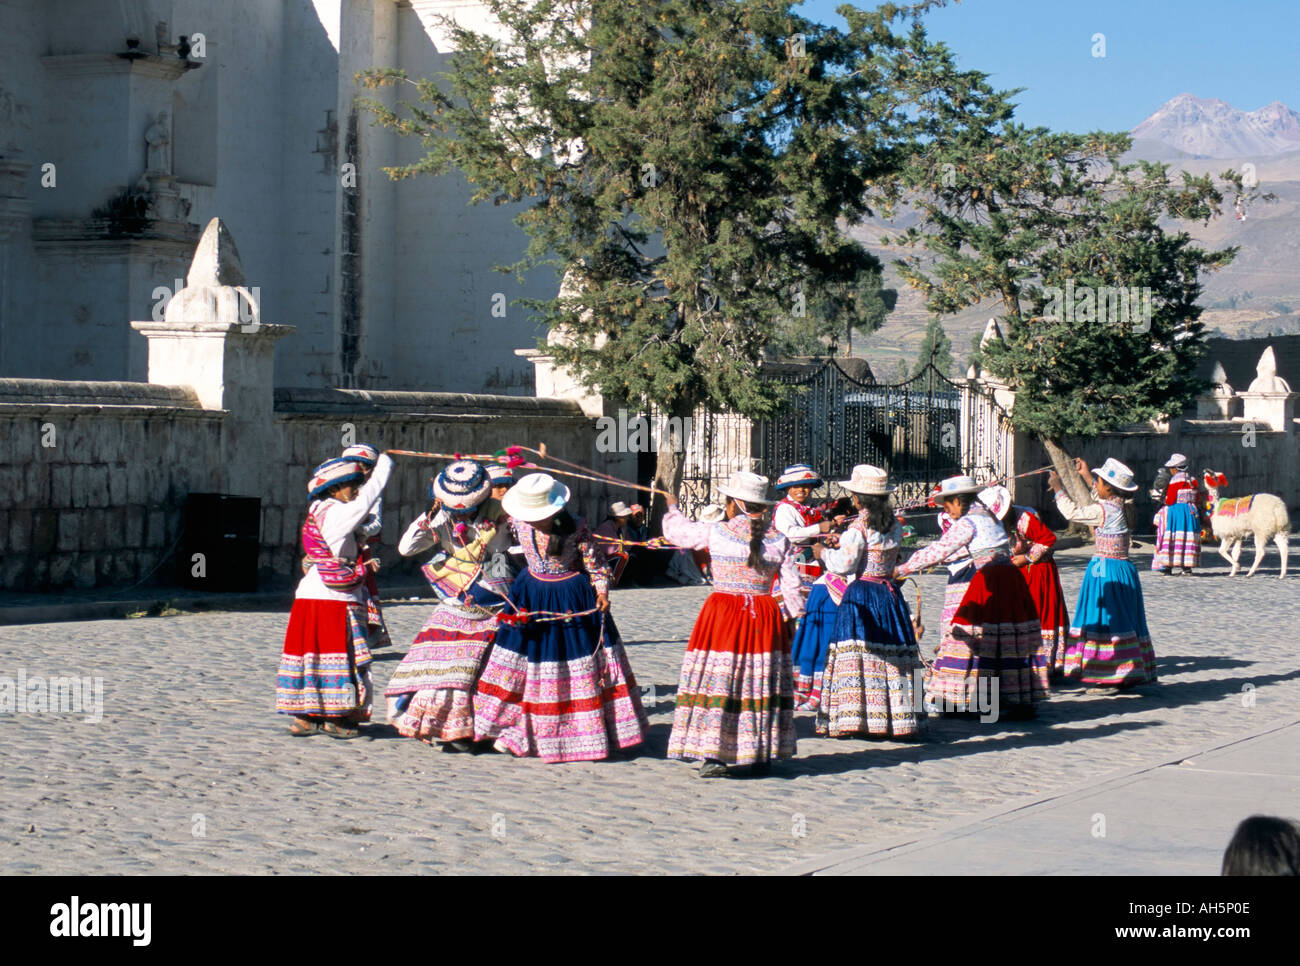 Girls in traditional local dress dancing in square at Yanque village Colca Canyon Peru South America Stock Photo